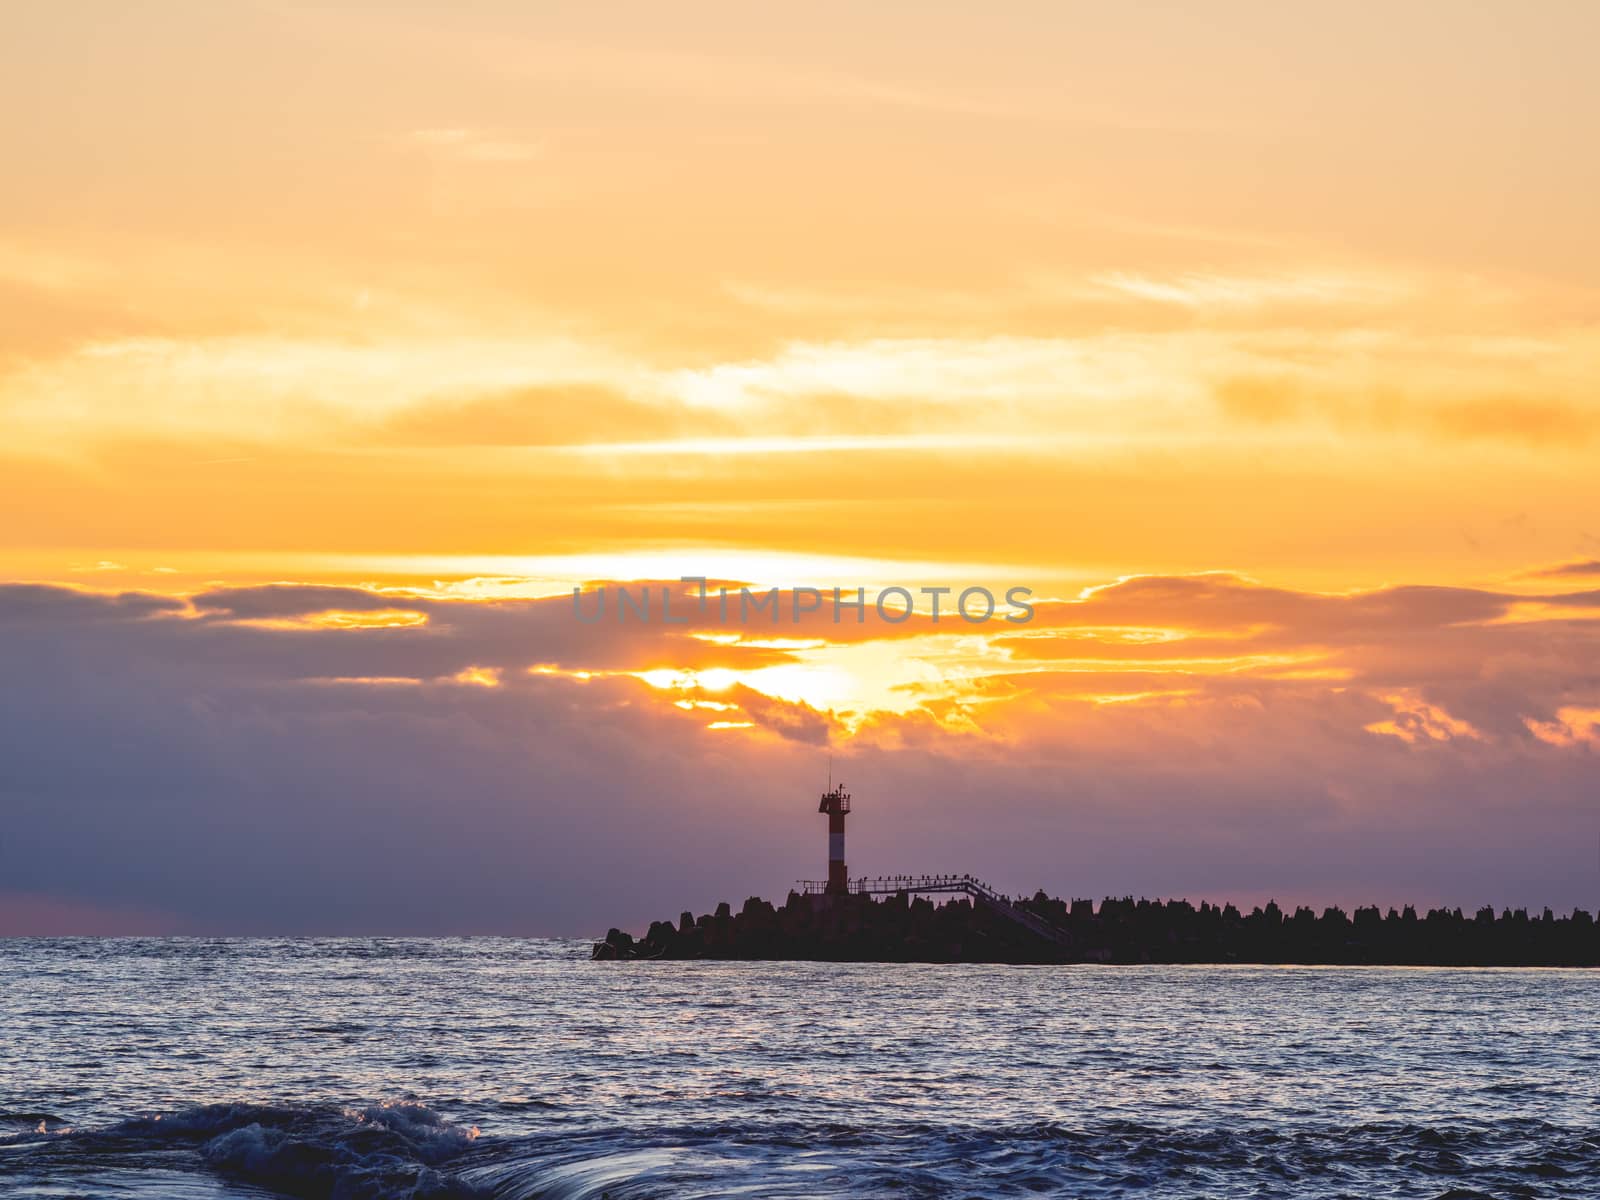 Beautiful sunset over Black sea in Sochi, Russia. Silhouettes of lighthouse and seagulls on the railing.